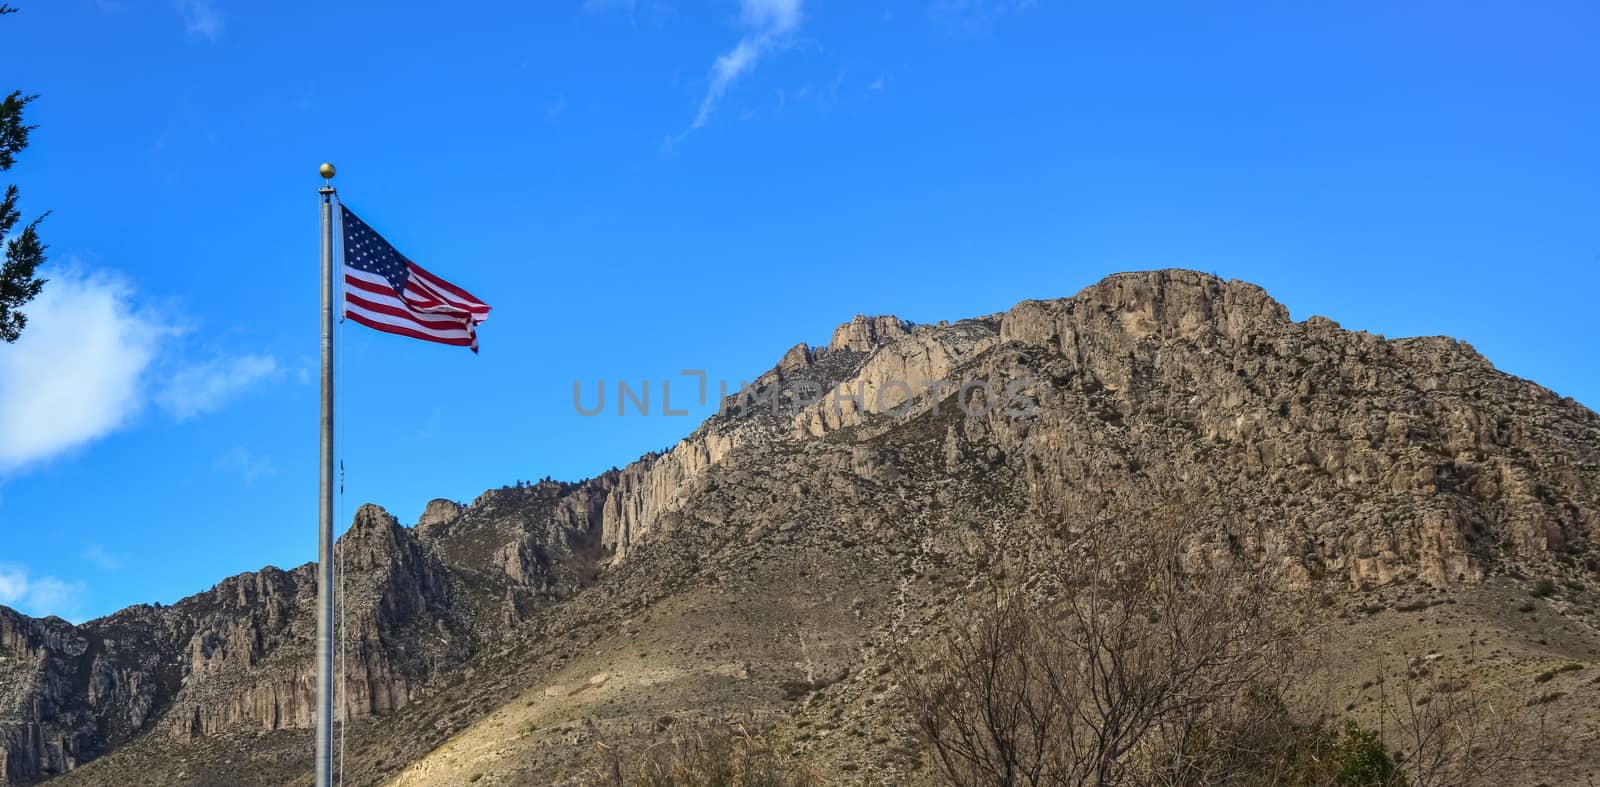 NEW MEXICO, USA - NOVEMBER 22, 2019: American flag against a blue sky in the territory of a visit center in a park in New Mexico